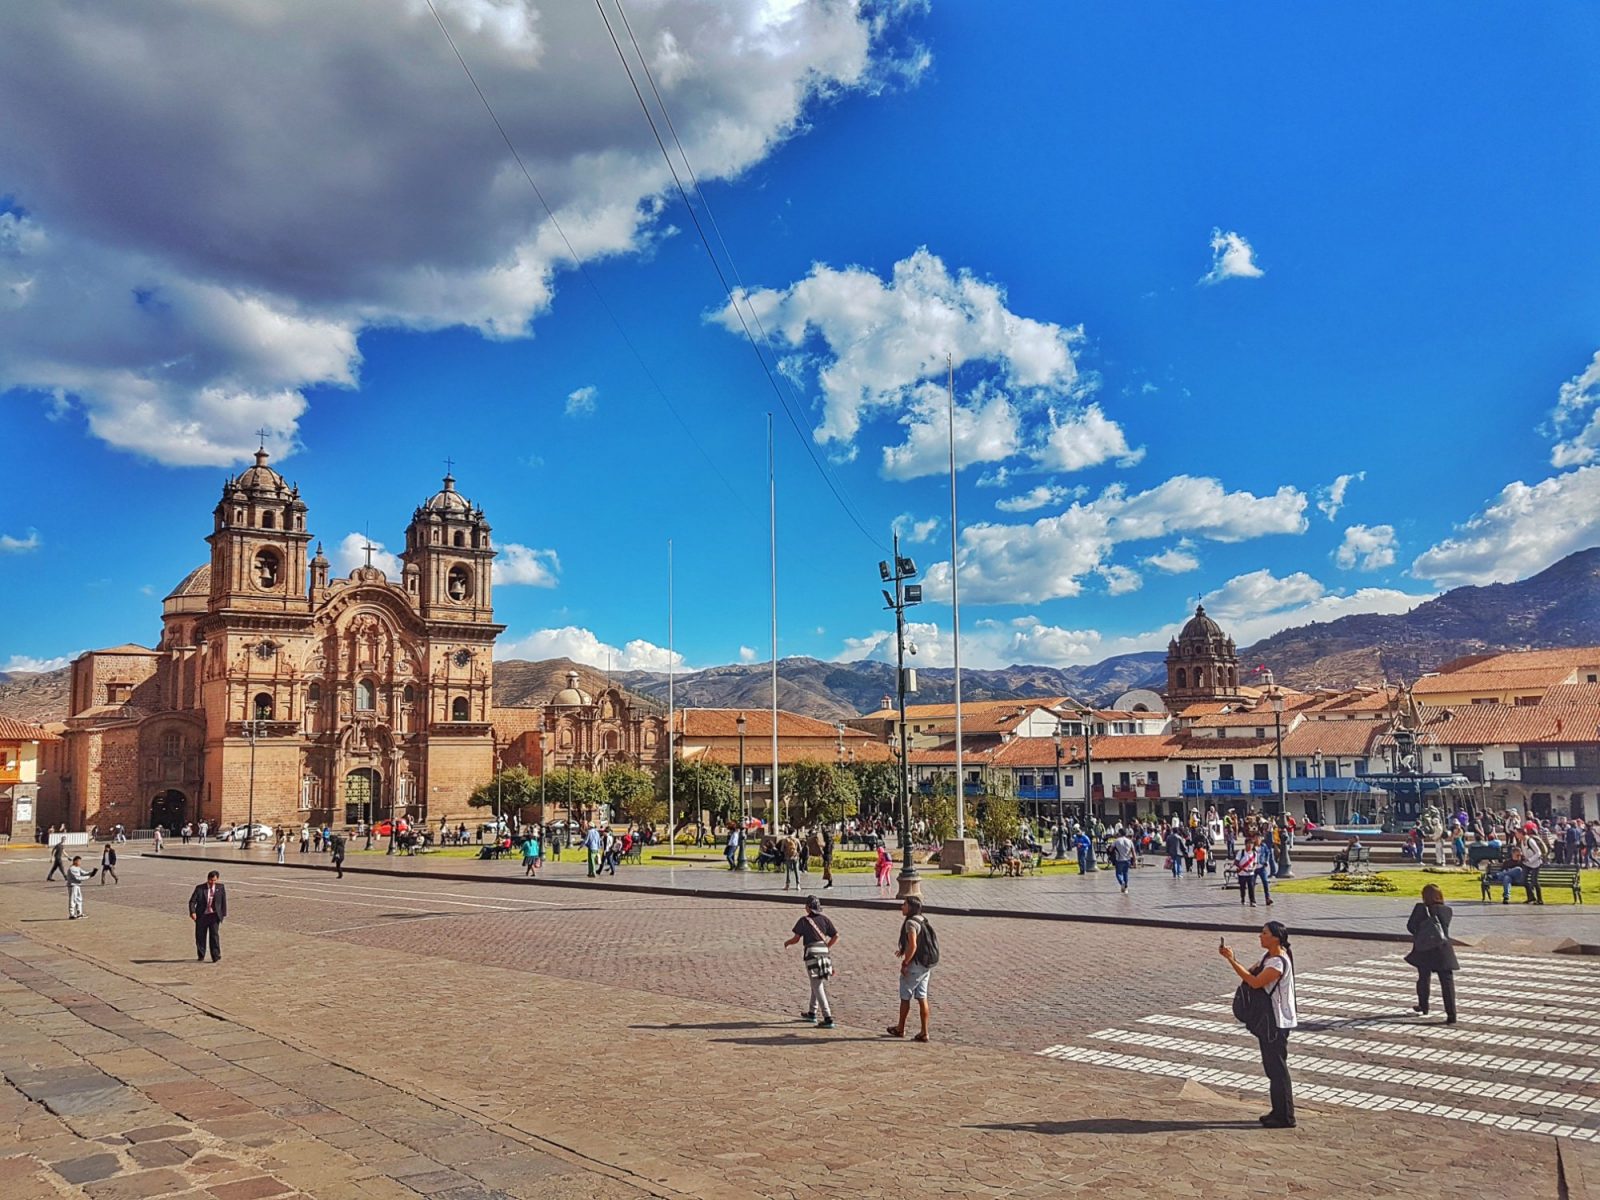 <img src="images/" width="800" height="600" alt="cusco - wp image 1662416678 - Peru: Our Quick Budget Guide to Cusco City">